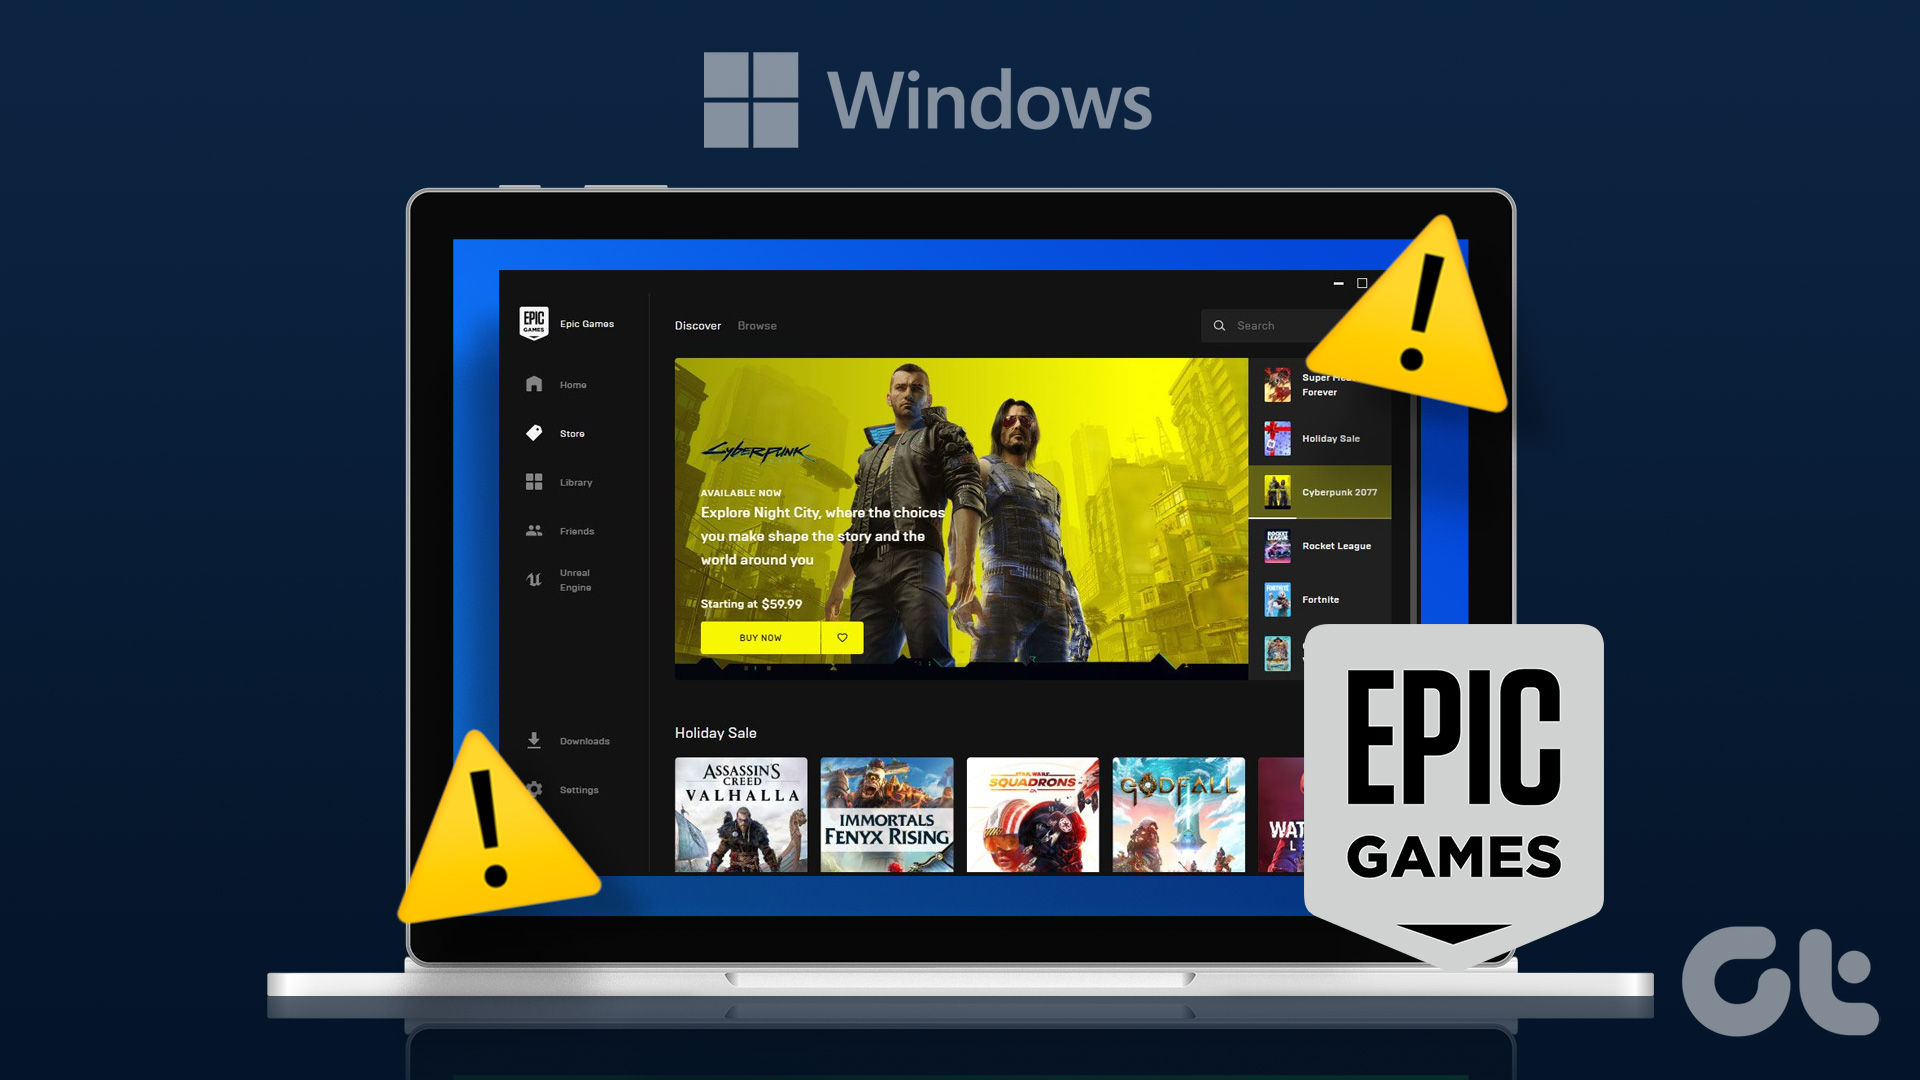 How to Speed up Downloads/ Updates in Epic Game Launcher (Working